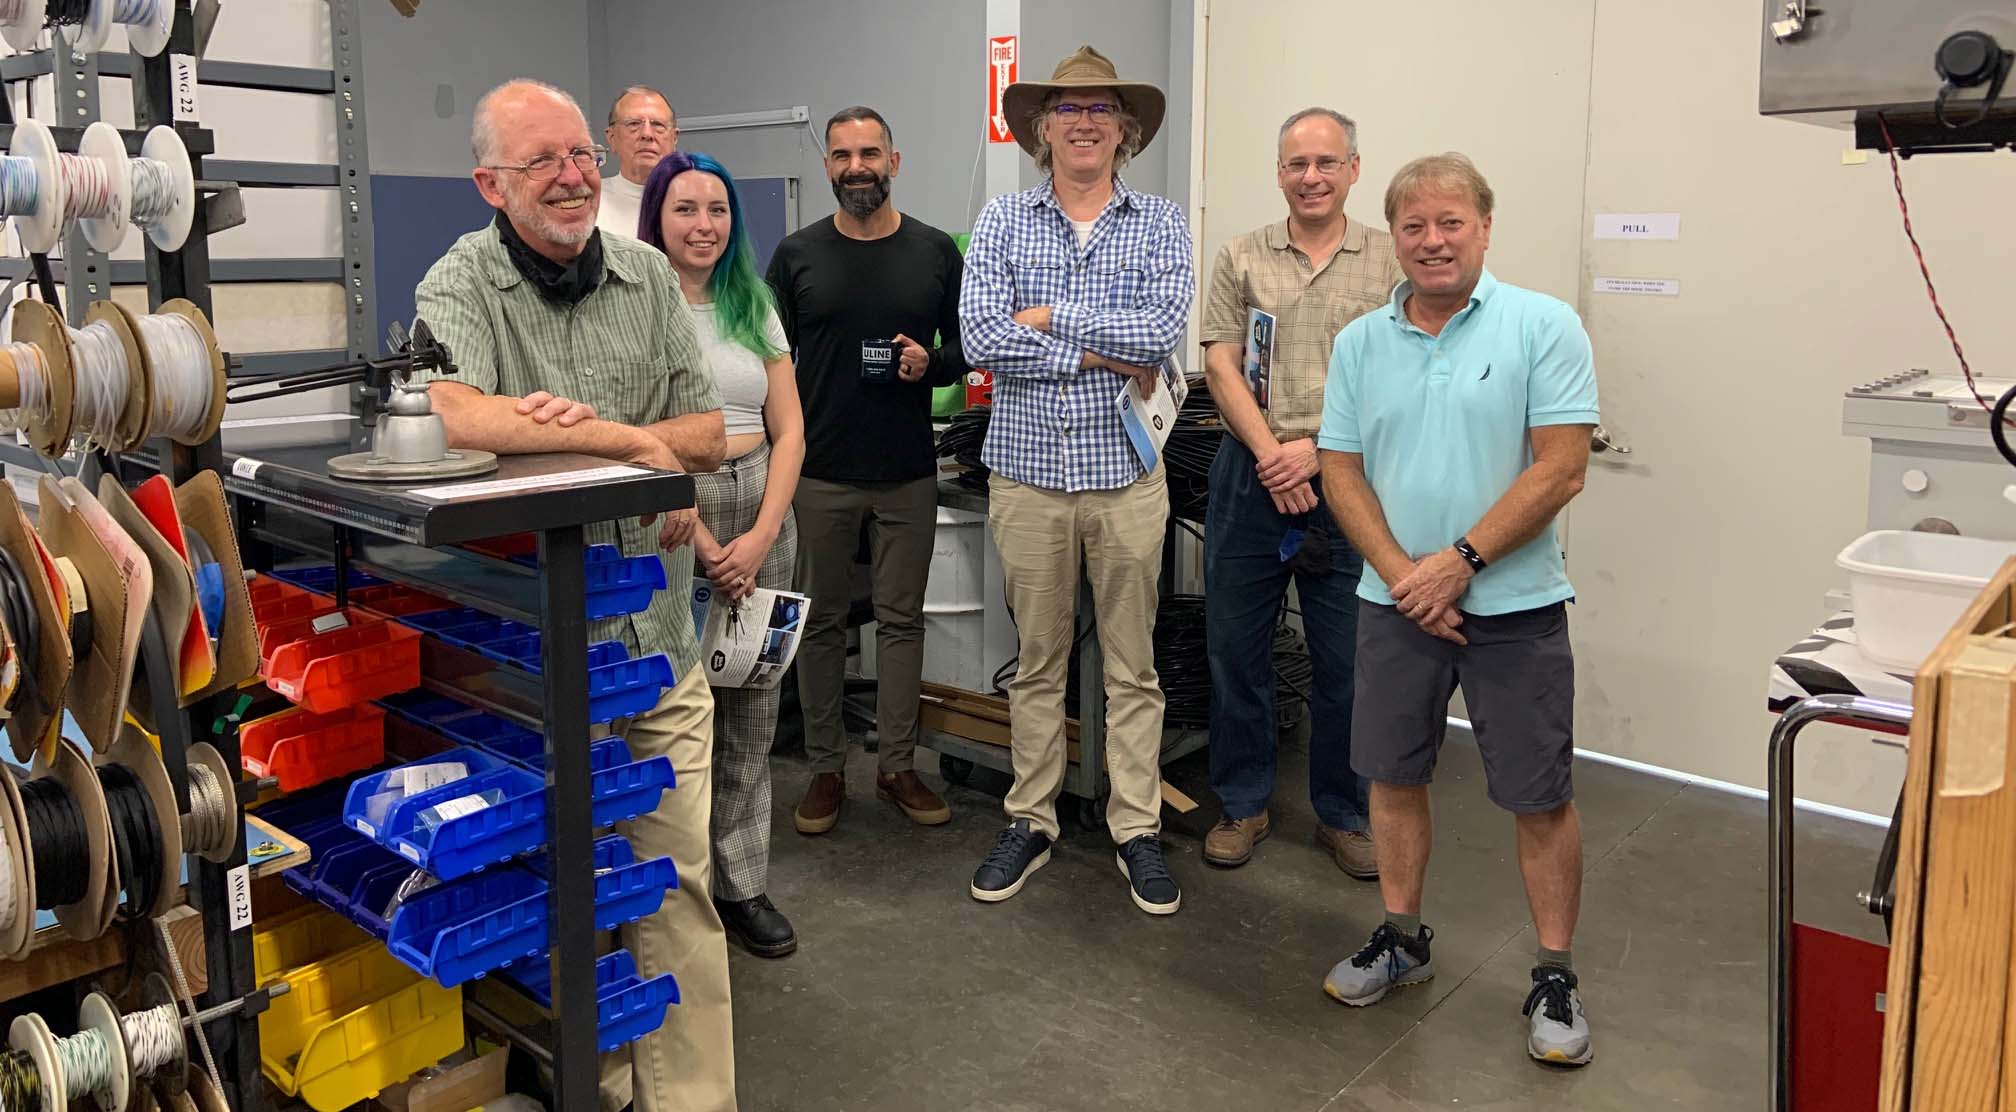 Chemistry professor Dave Pullman and physics professor Matt Anderson (second and third from right, respectively) lead a team developing sensors to detect oil spills. (See footnote for additional IDs)